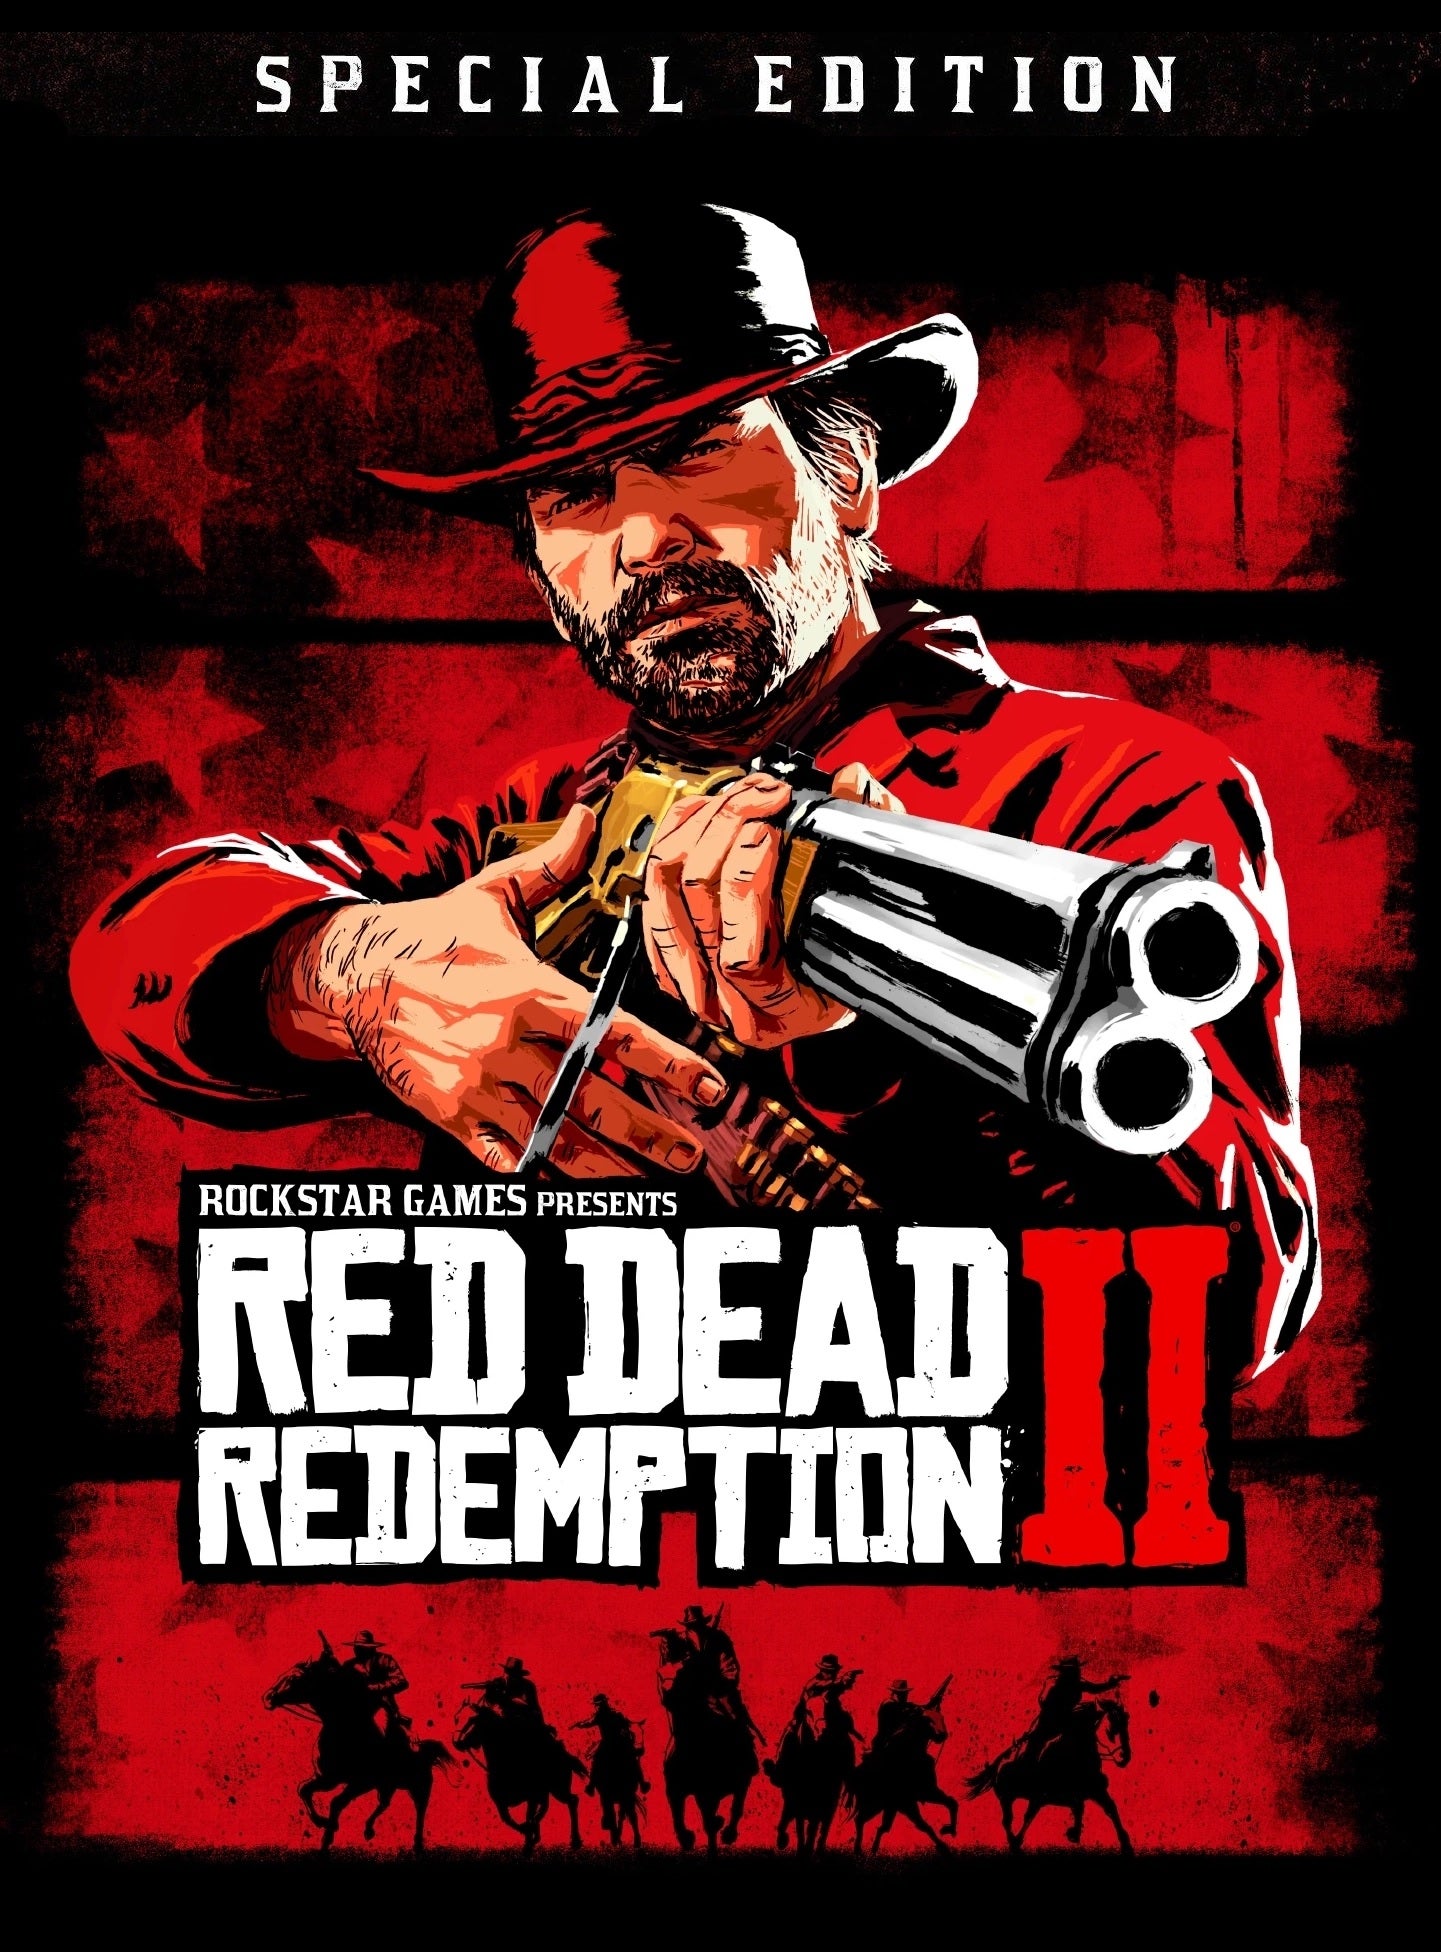 red dead redemption 2 special edition price